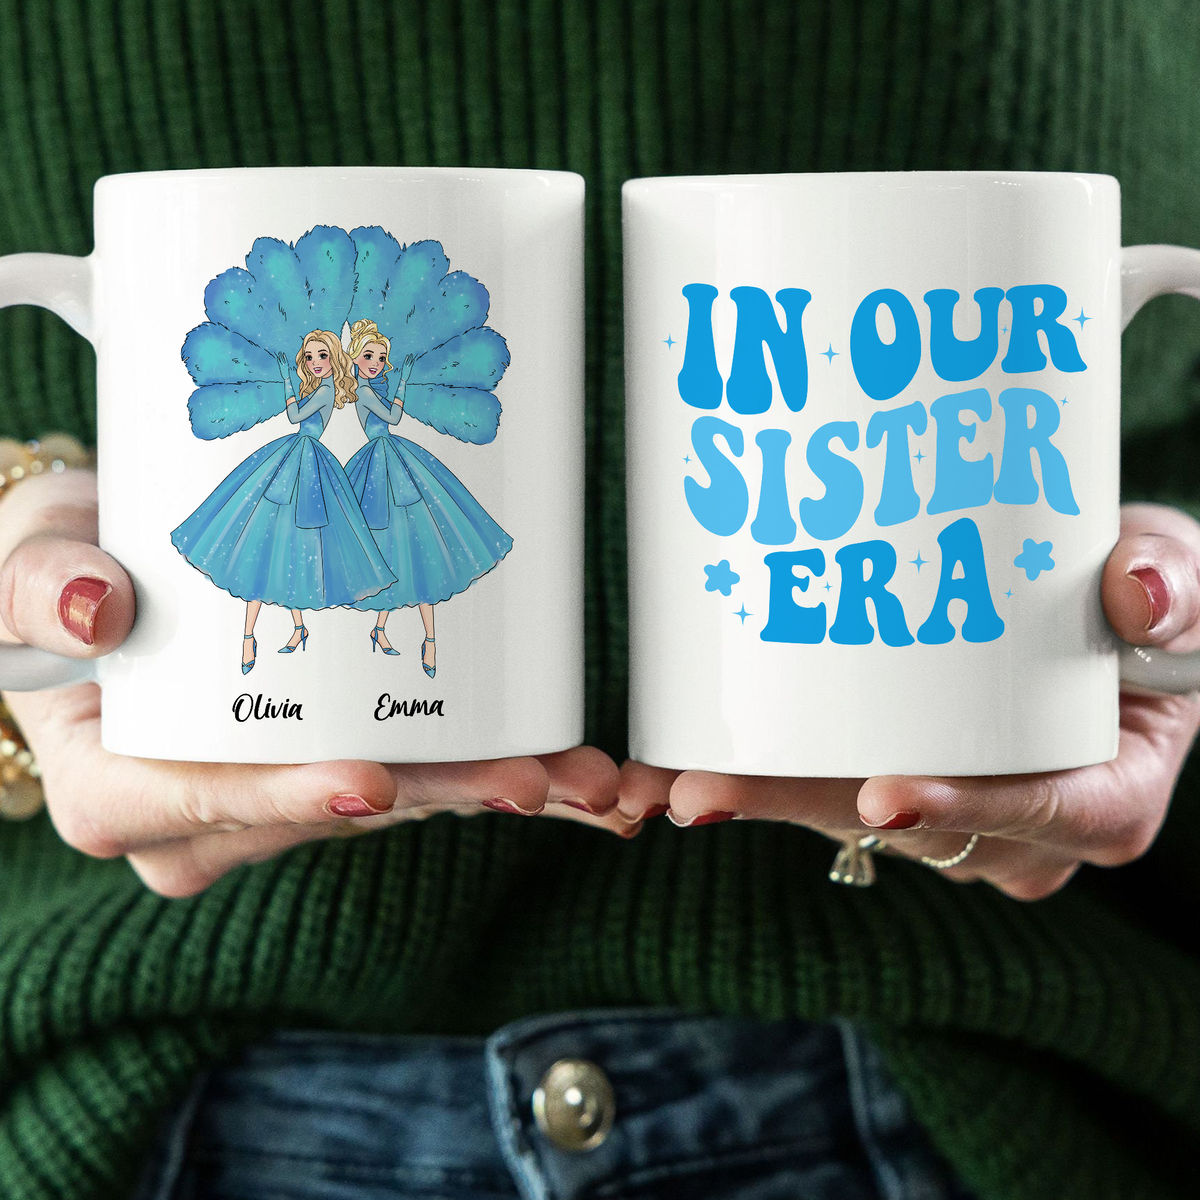 Personalized Mug - Personalized Mug For Sisters - Sisters Sisters - White Christmas - In our sister era_4